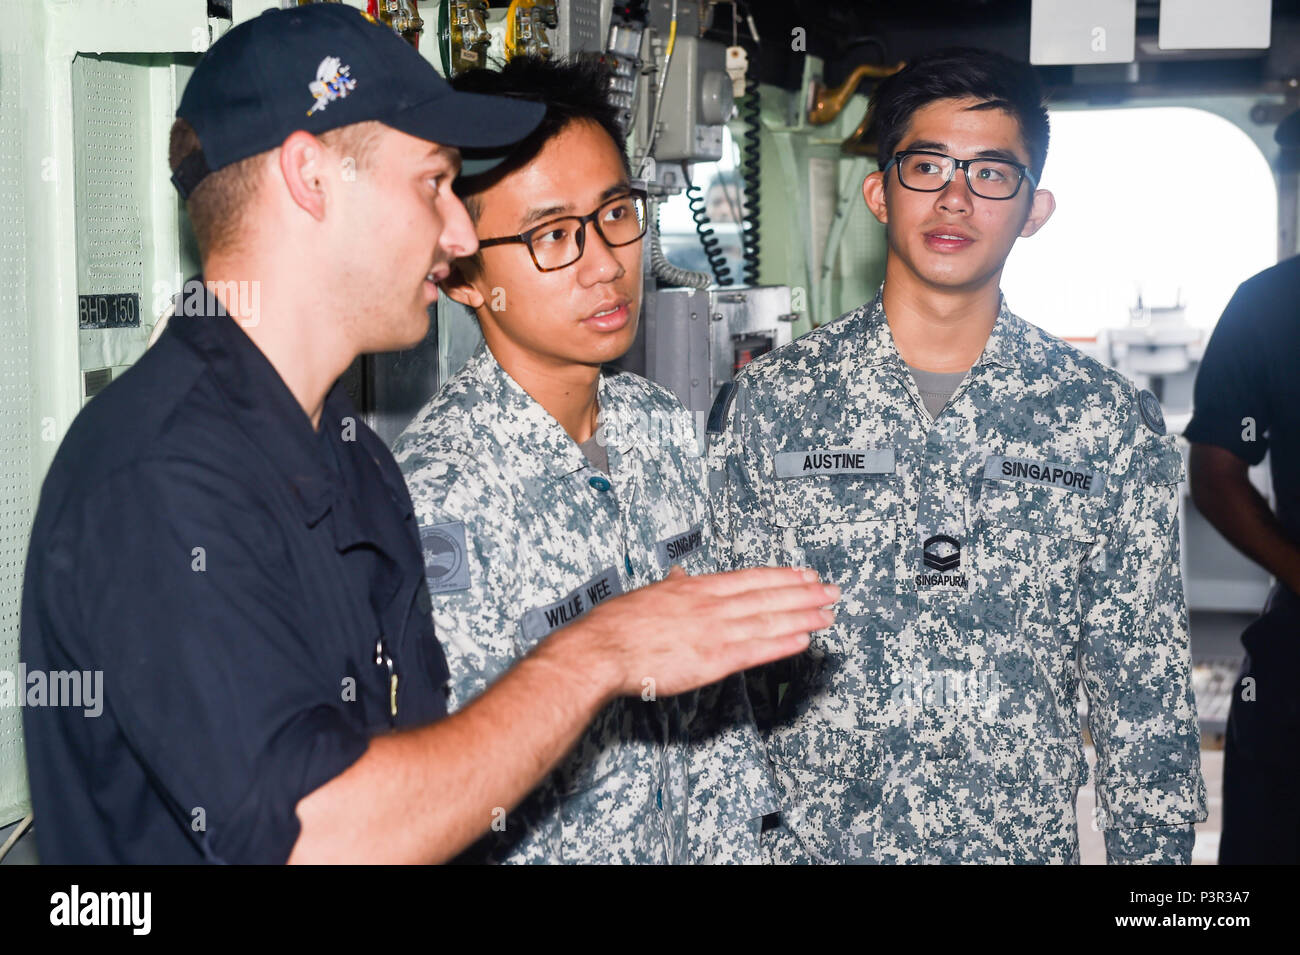 160726-N-YS140-048 SOUTH CHINA SEA (July 26, 2016) Republic of Singapore Navy (RSN) sailors Lt. Willie Wee and Cpl. Austine Yapp are briefed by Ens. Drew Boyer aboard the Arleigh Burke-class guided missile-destroyer USS Stethem (DDG 63) as part of a sailor exchange during Cooperation Afloat Readiness and Training (CARAT) Singapore 2016, July 26. CARAT is a series of annual maritime exercises between the U.S. Navy, U.S. Marine Corps and the armed forces of nine partner nations to include Bangladesh, Brunei, Cambodia, Indonesia, Malaysia, the Philippines, Singapore, Thailand, and Timor-Leste. (U Stock Photo